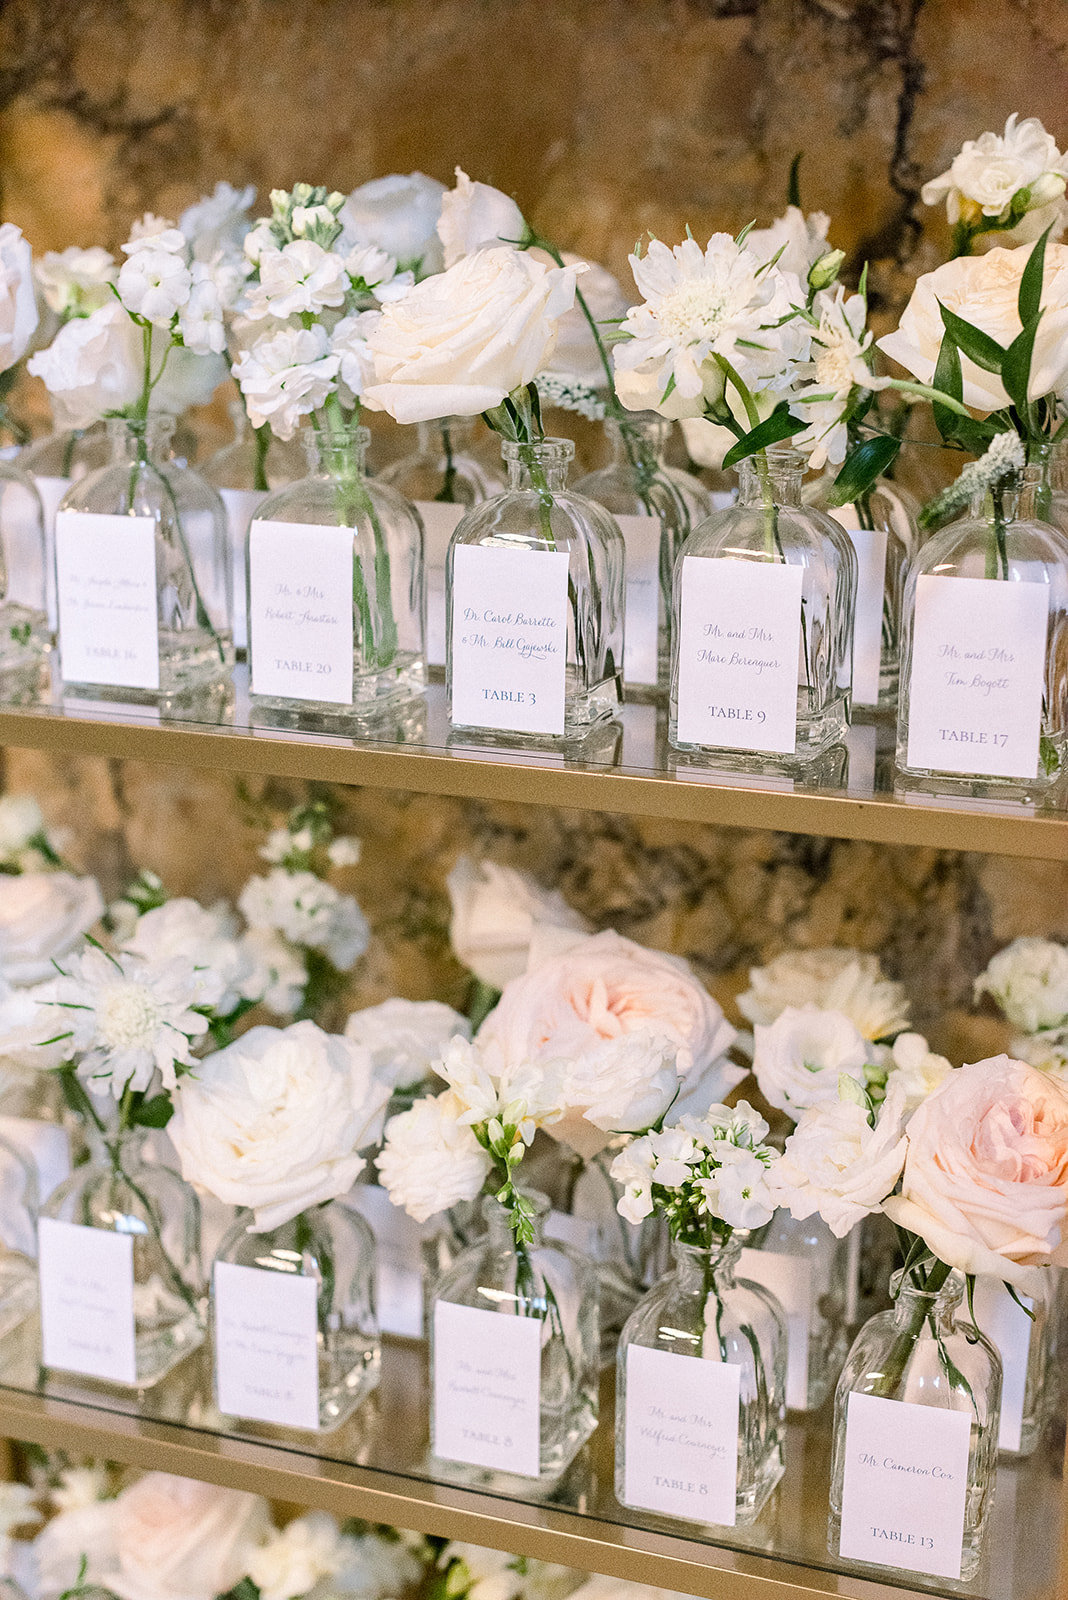 Unique escort card display and wedding seating chart